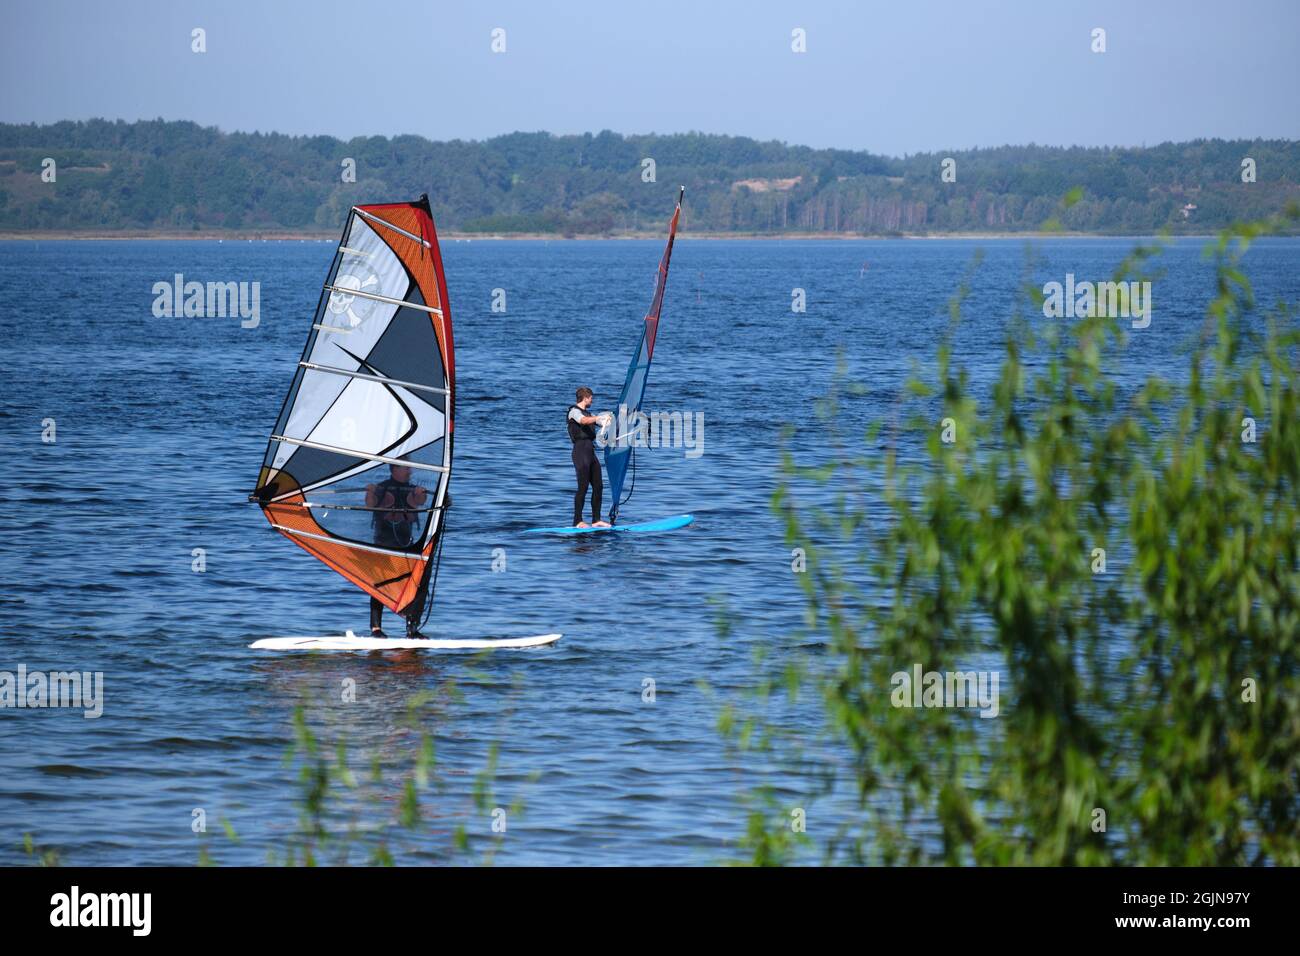 Two surfers learn to swim, Pucka Bay, Baltic, Poland Stock Photo